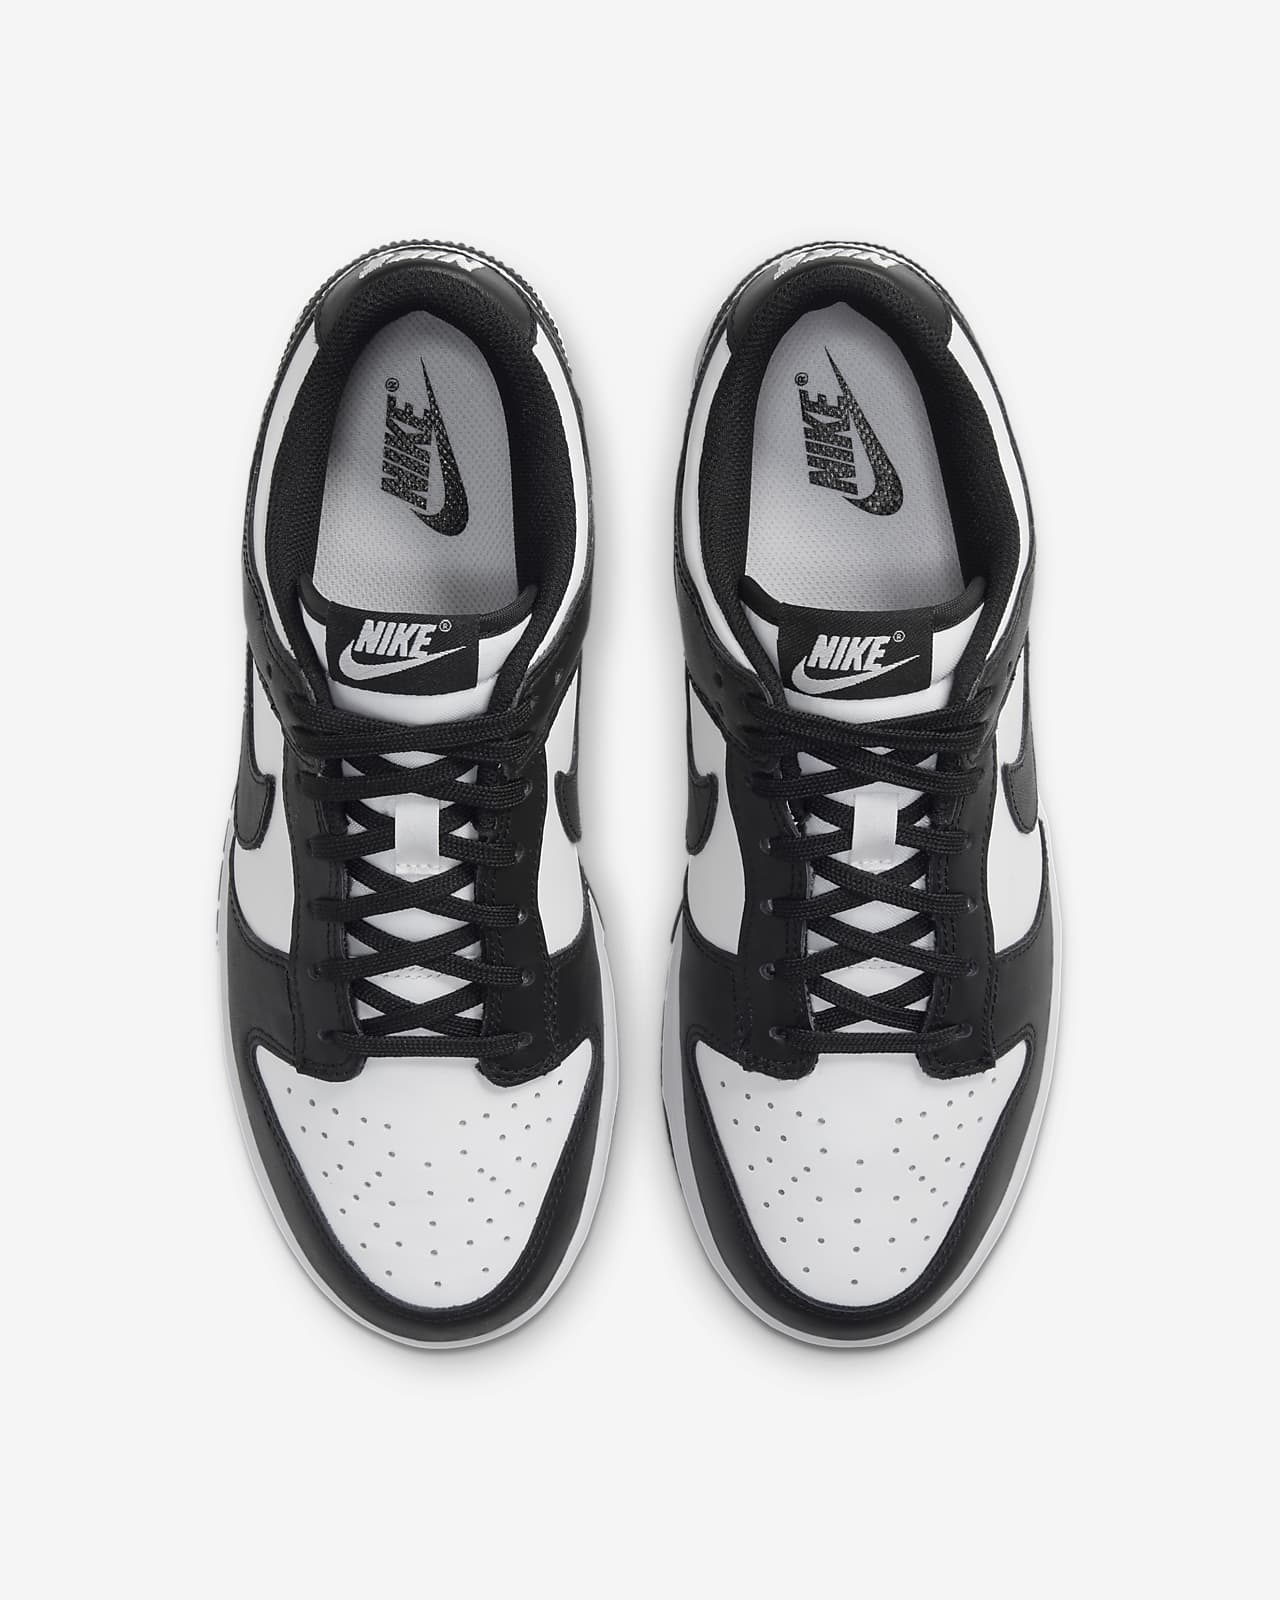 Nike Dunk - Sneakers Nike pour Femme et Homme - Limited Resell